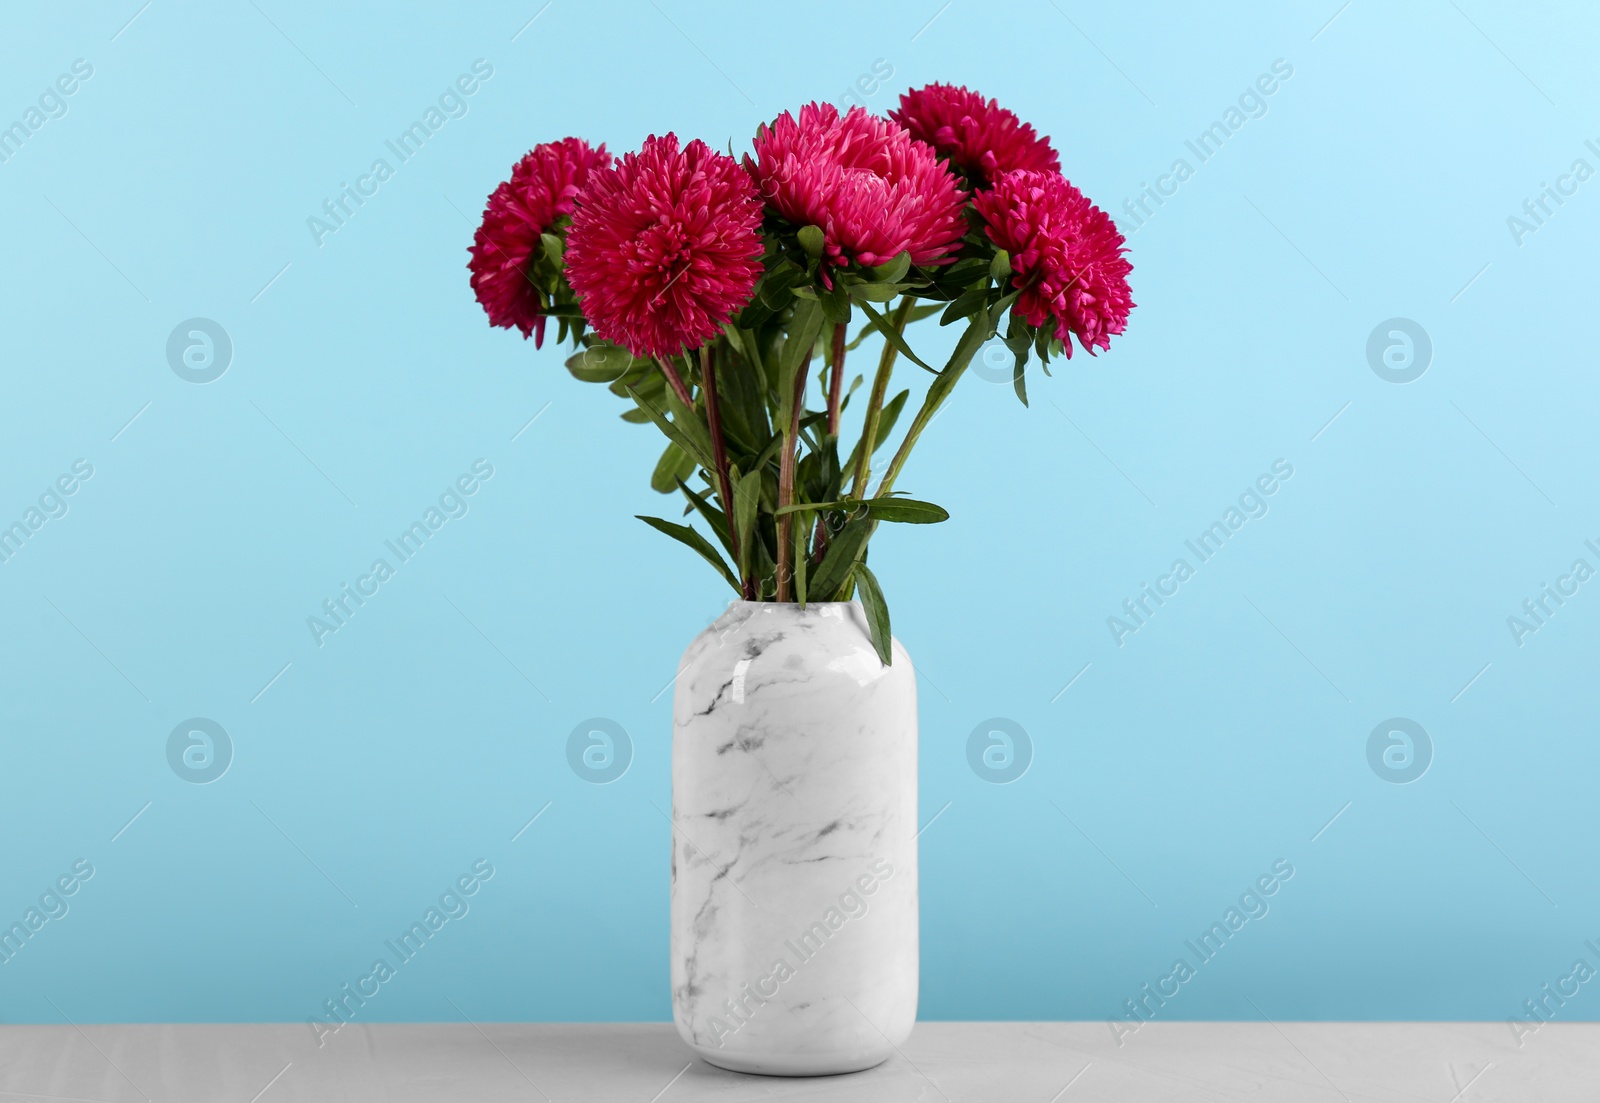 Photo of Beautiful asters in vase on table against light blue background. Autumn flowers